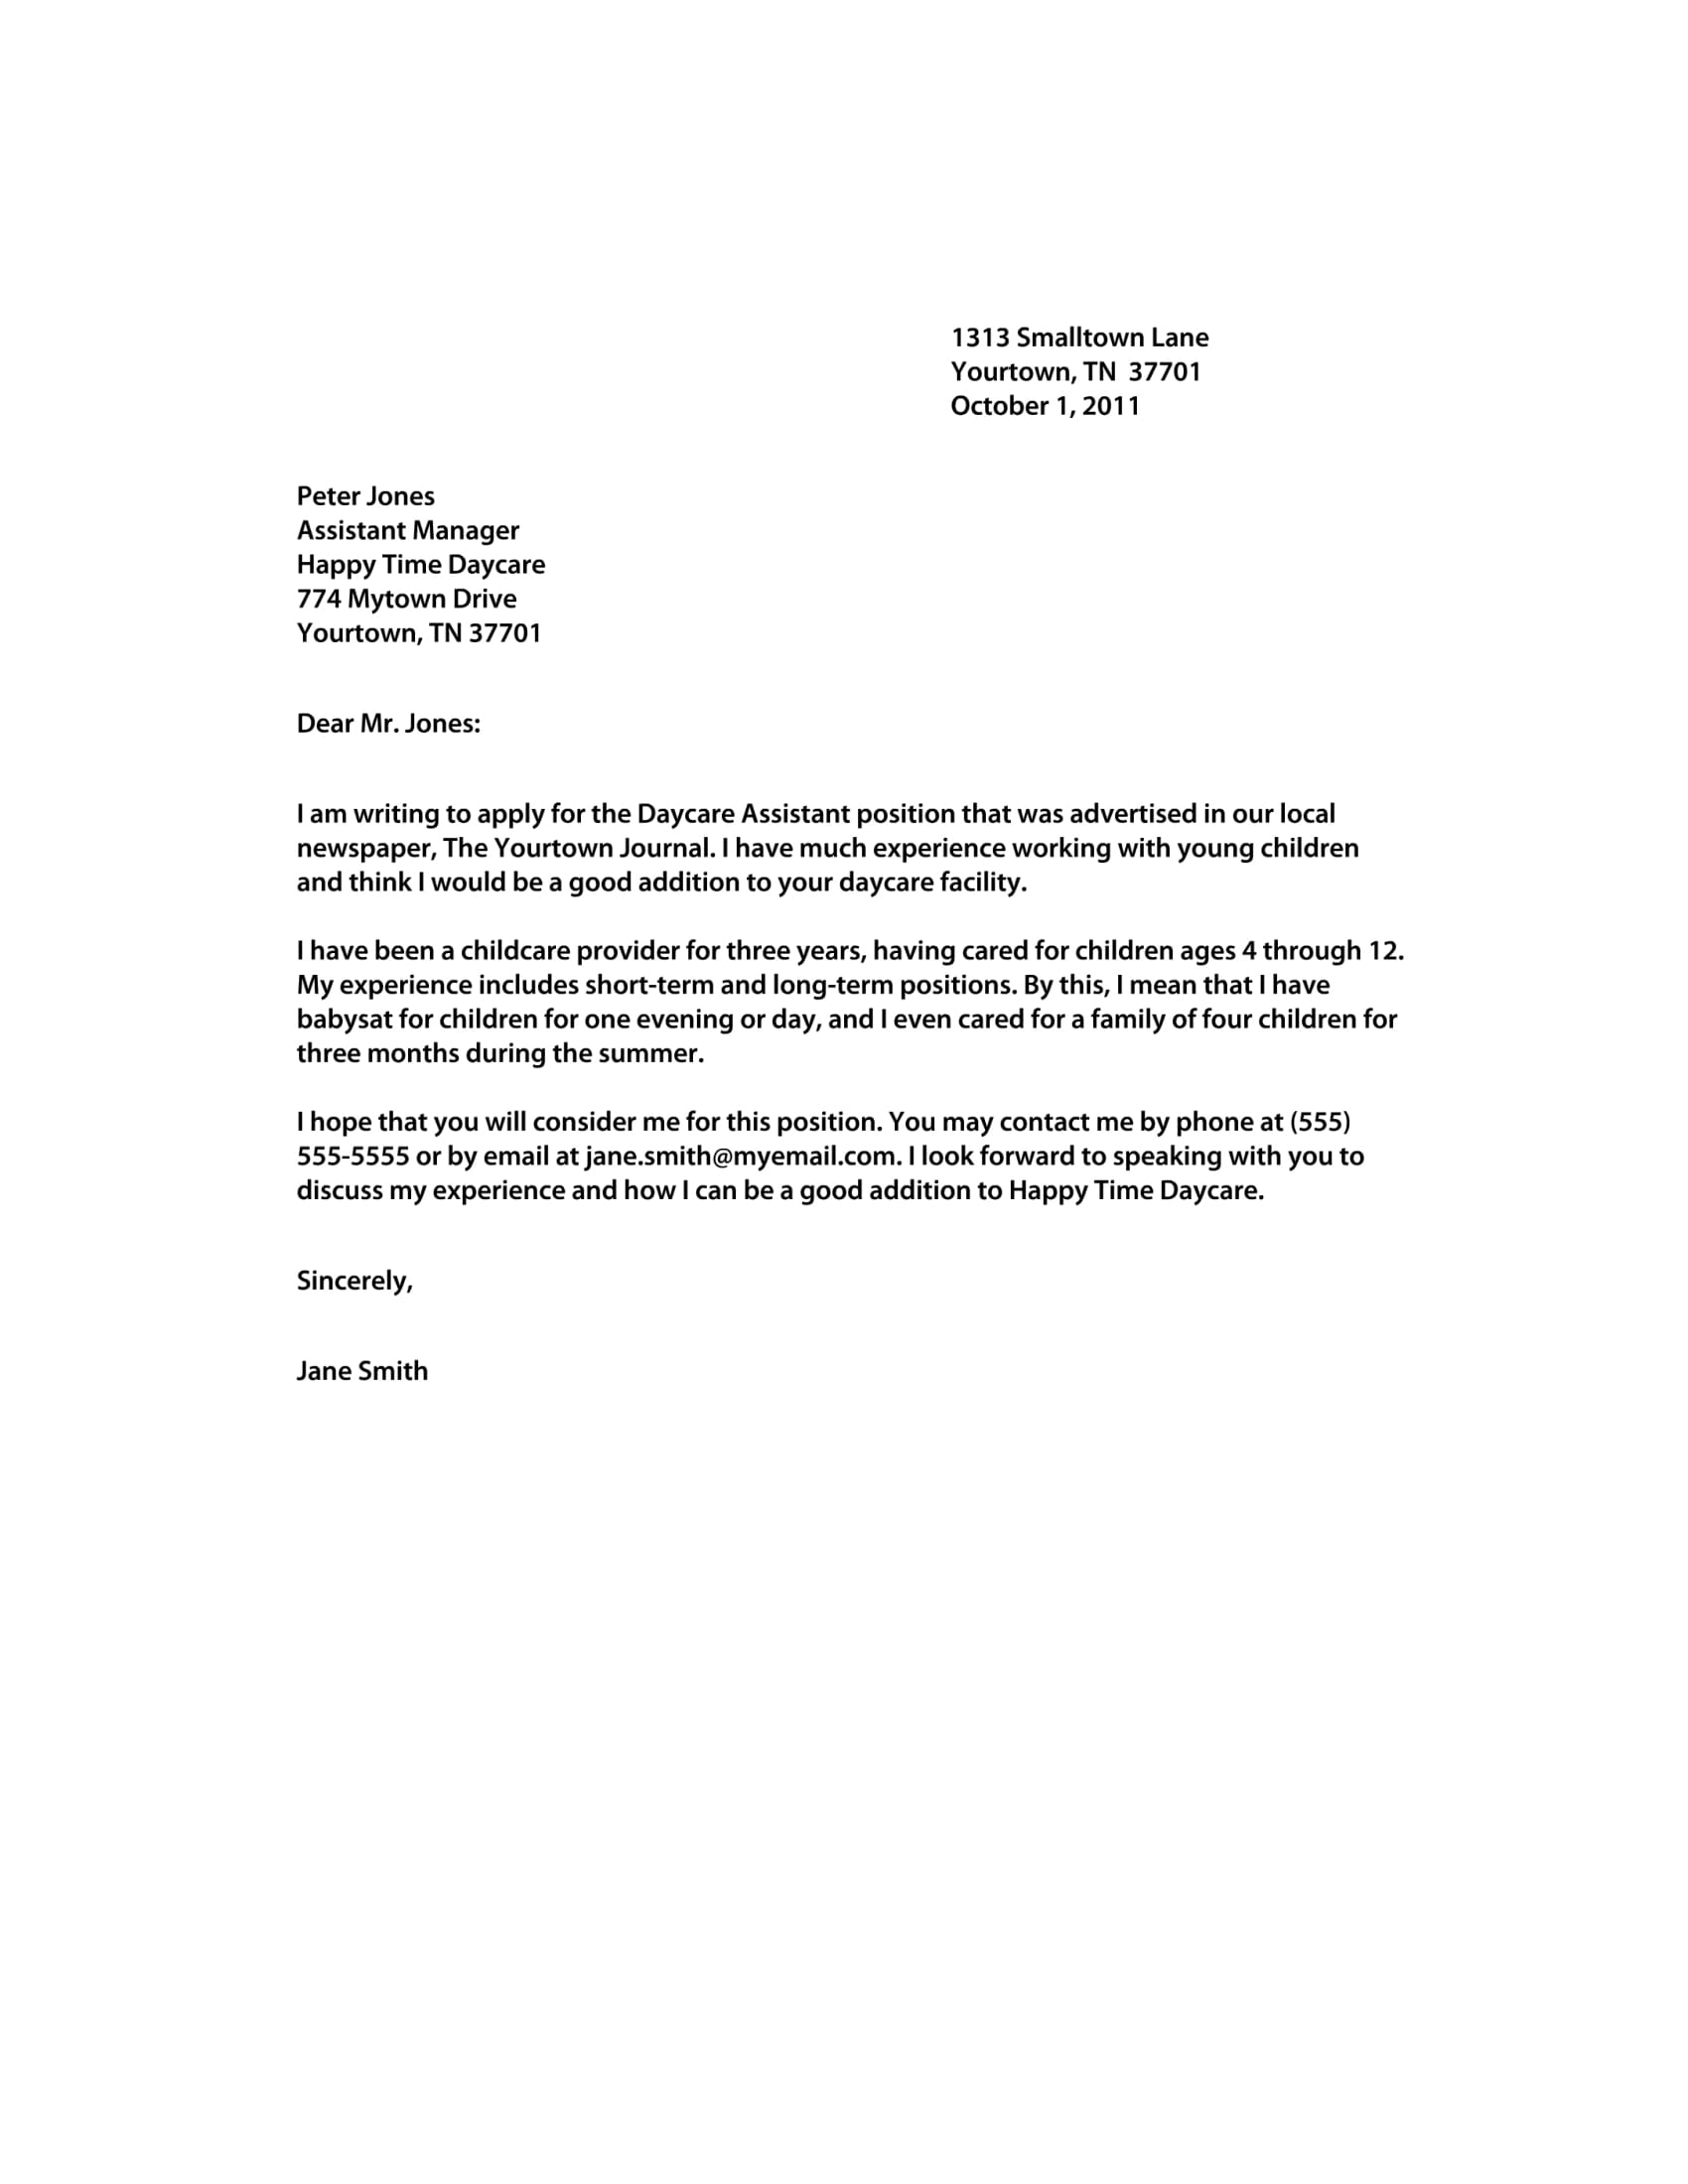 good cover letter examples pdf